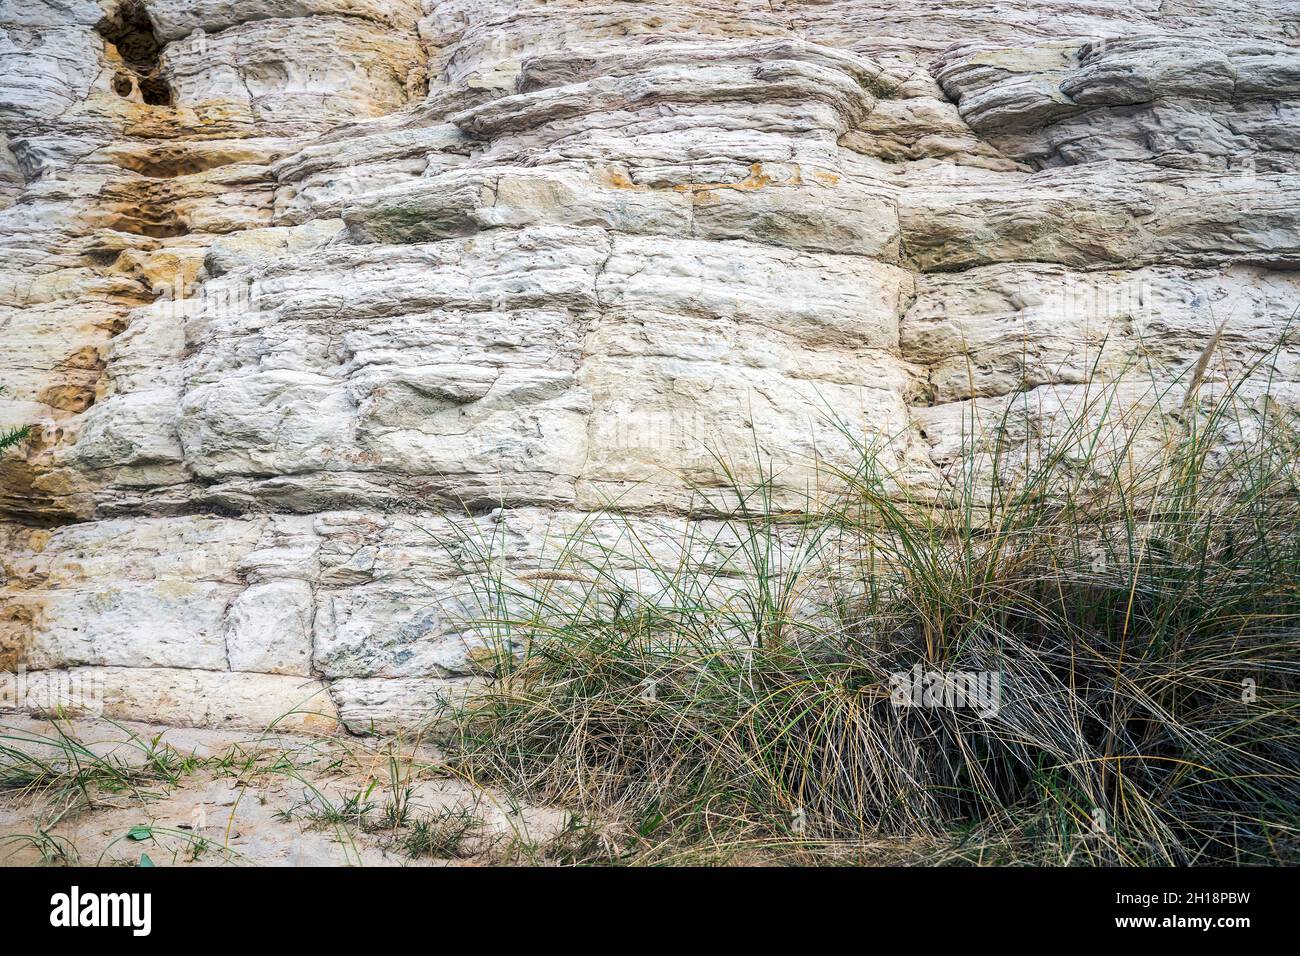 Layers of sandstone rock formed during the Eocene period that make up the east cliff at Bournemouth in Dorset UK Stock Photo